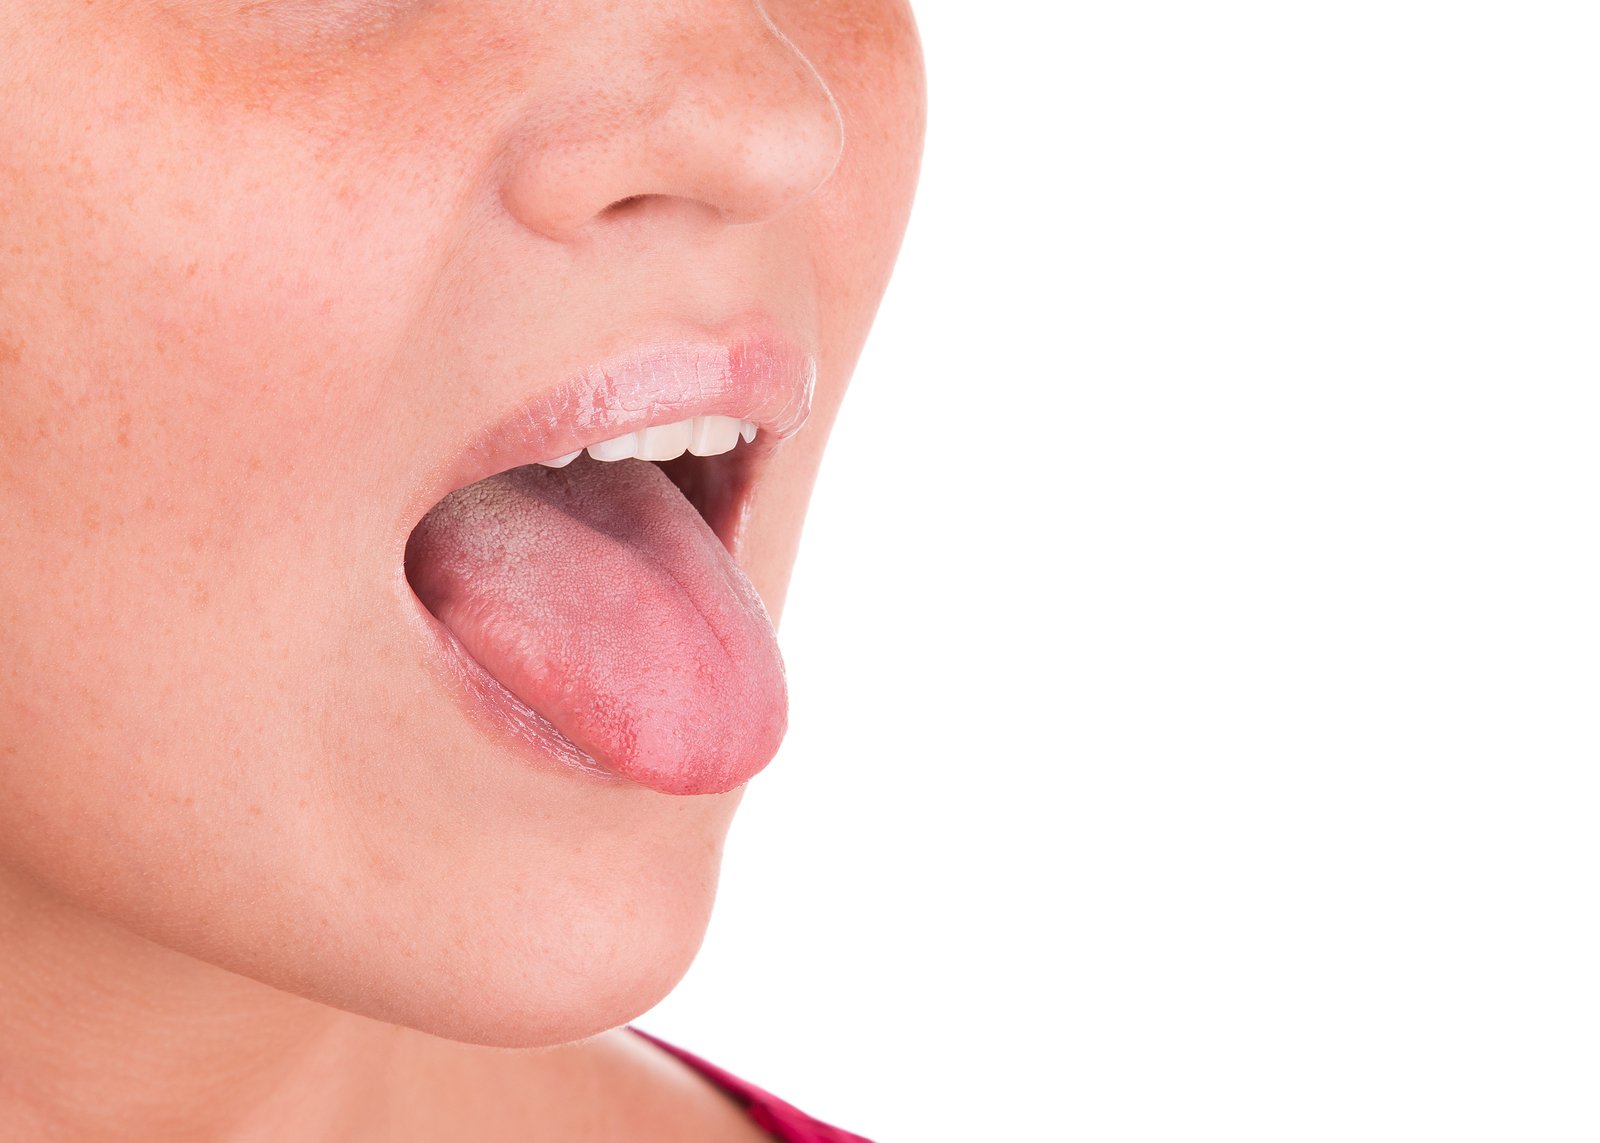 Featured image for “What Your Tongue Could Be Signaling About Your Health”